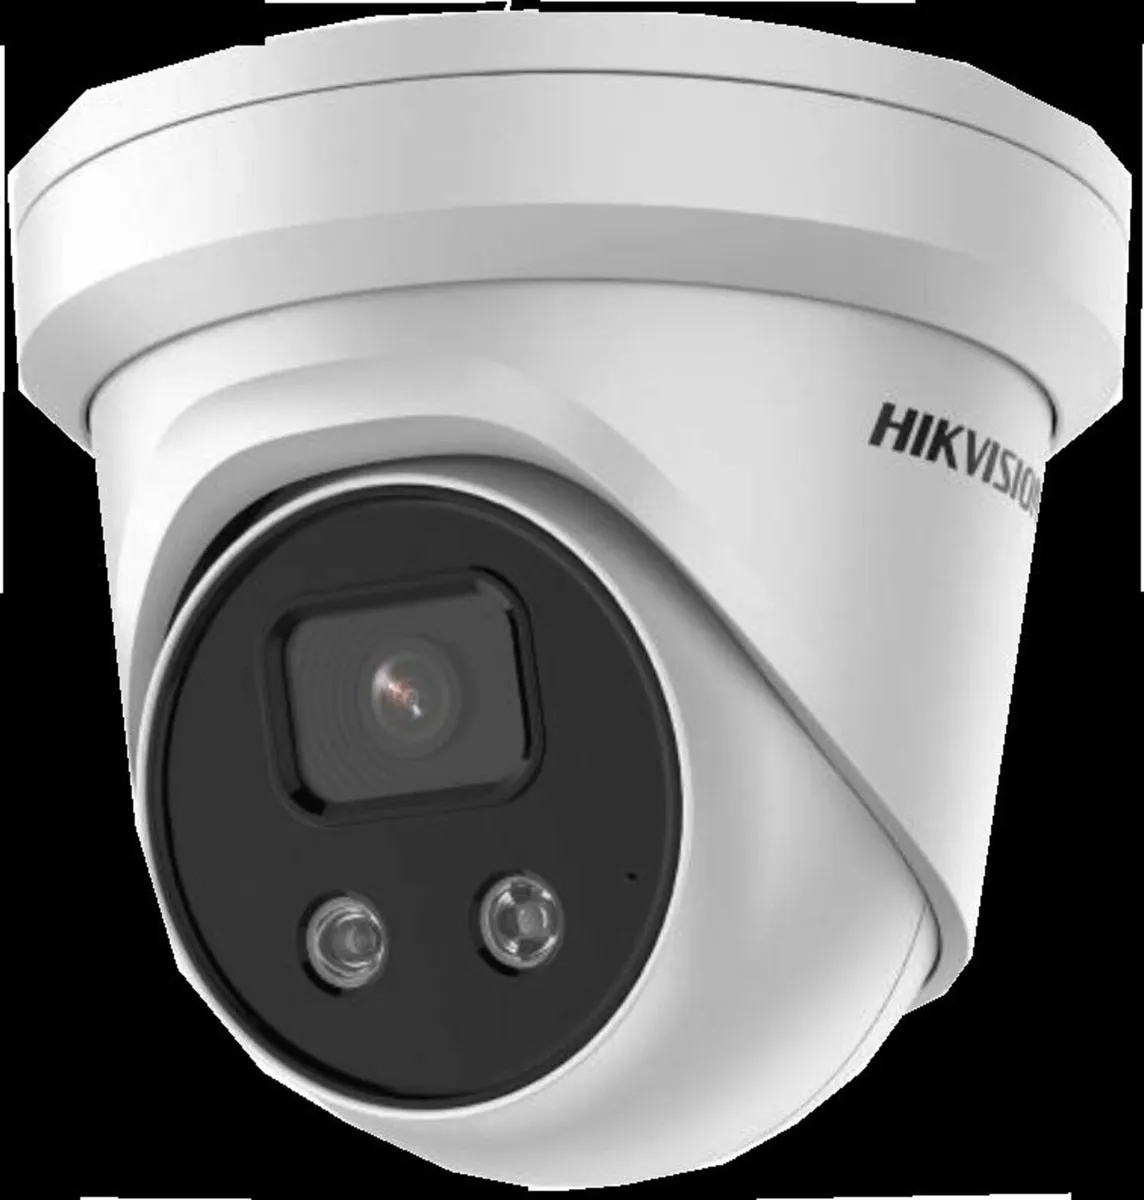 HIKVision 4MP Darkfighter IP camera - Mobile View